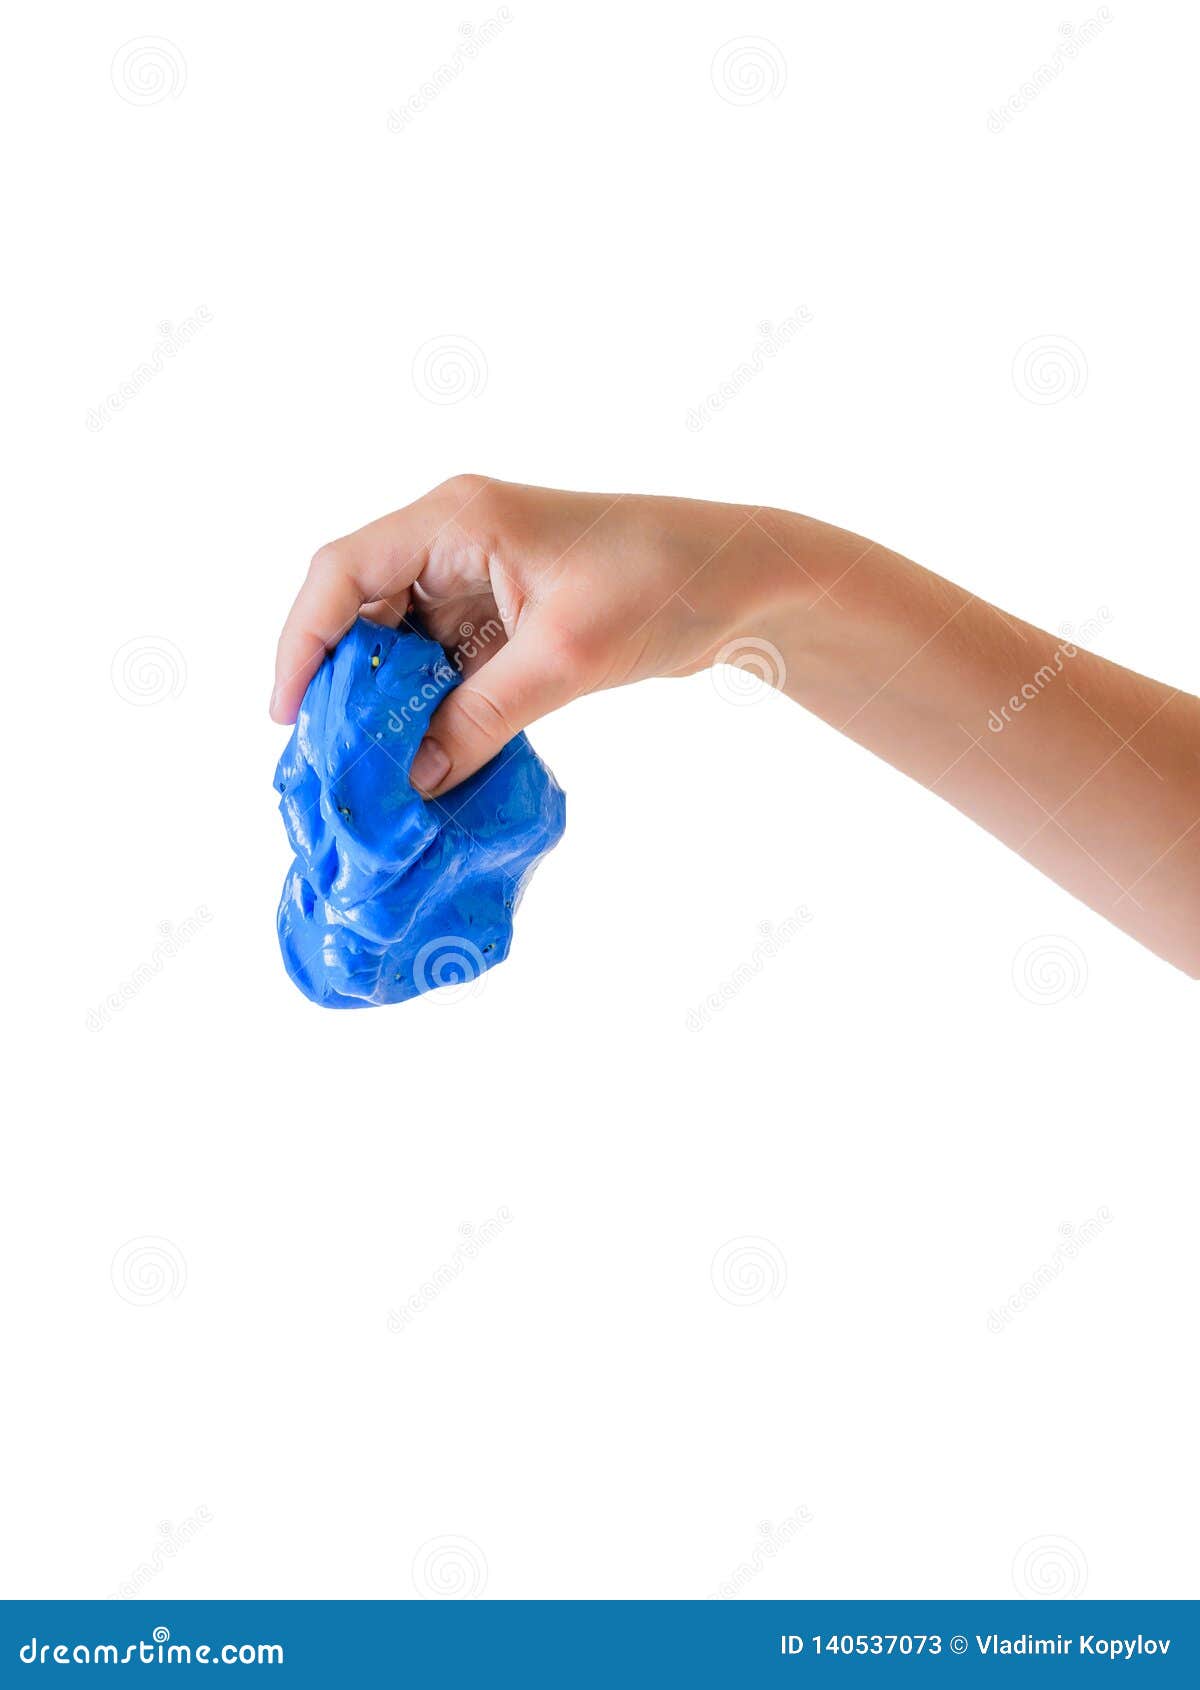 a-little-girl-hands-making-slime-herself-on-blue-wooden-background